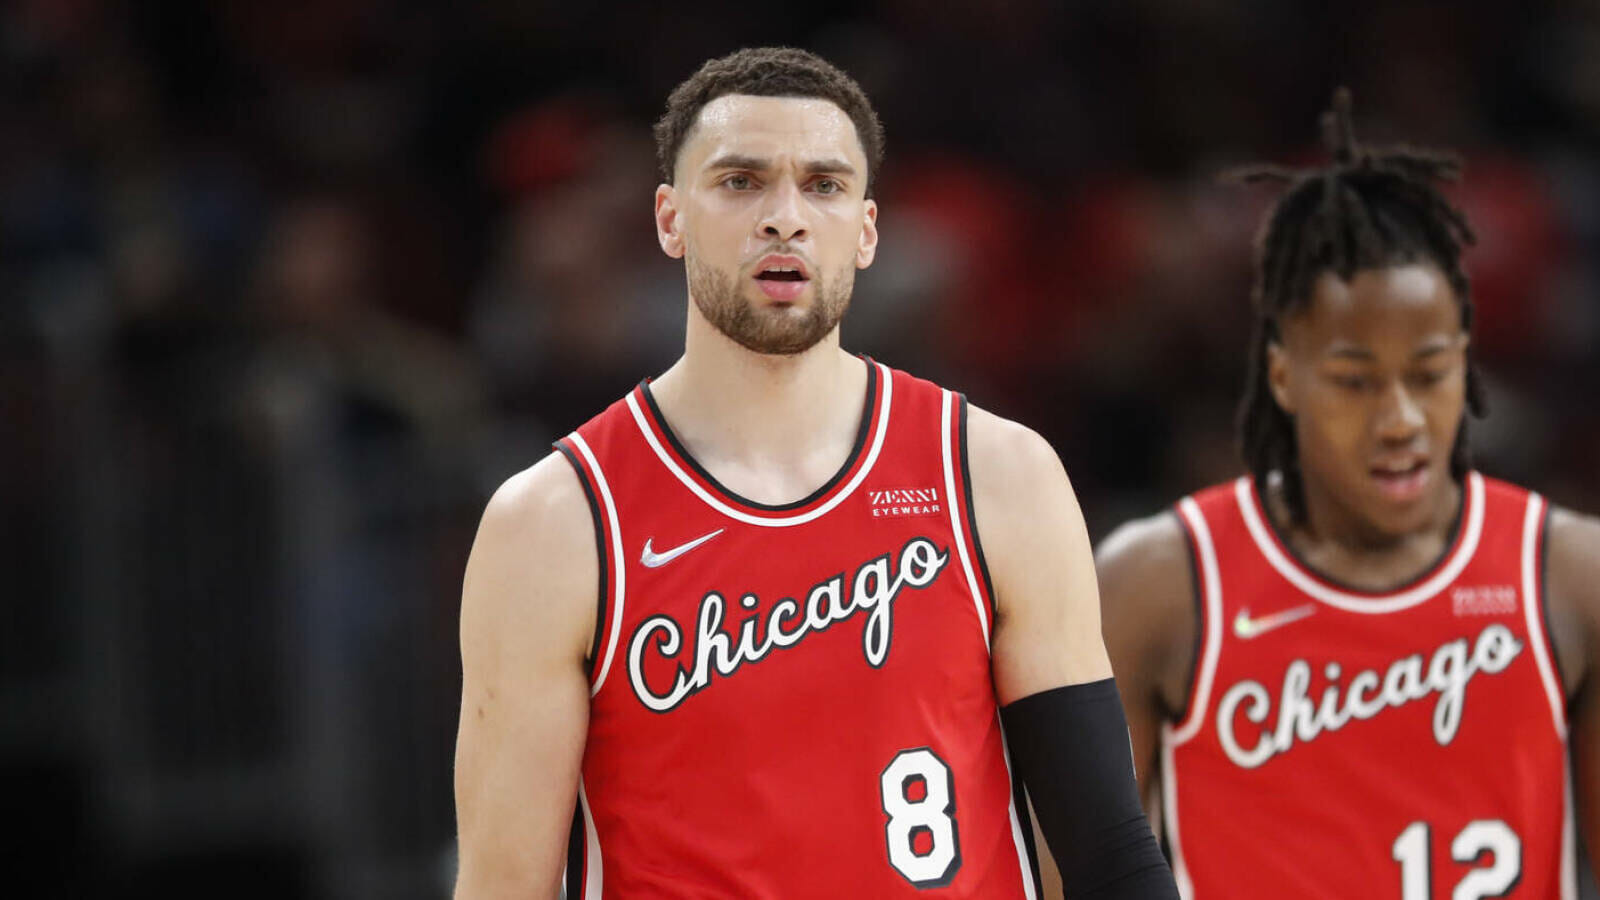 Mar 31, 2022; Chicago, Illinois, USA; Chicago Bulls guard Zach LaVine (8) reacts during the first half of an NBA game against the LA Clippers at United Center. Mandatory Credit: Kamil Krzaczynski-USA TODAY Sports (NBA Rumors, Milwaukee Bucks)